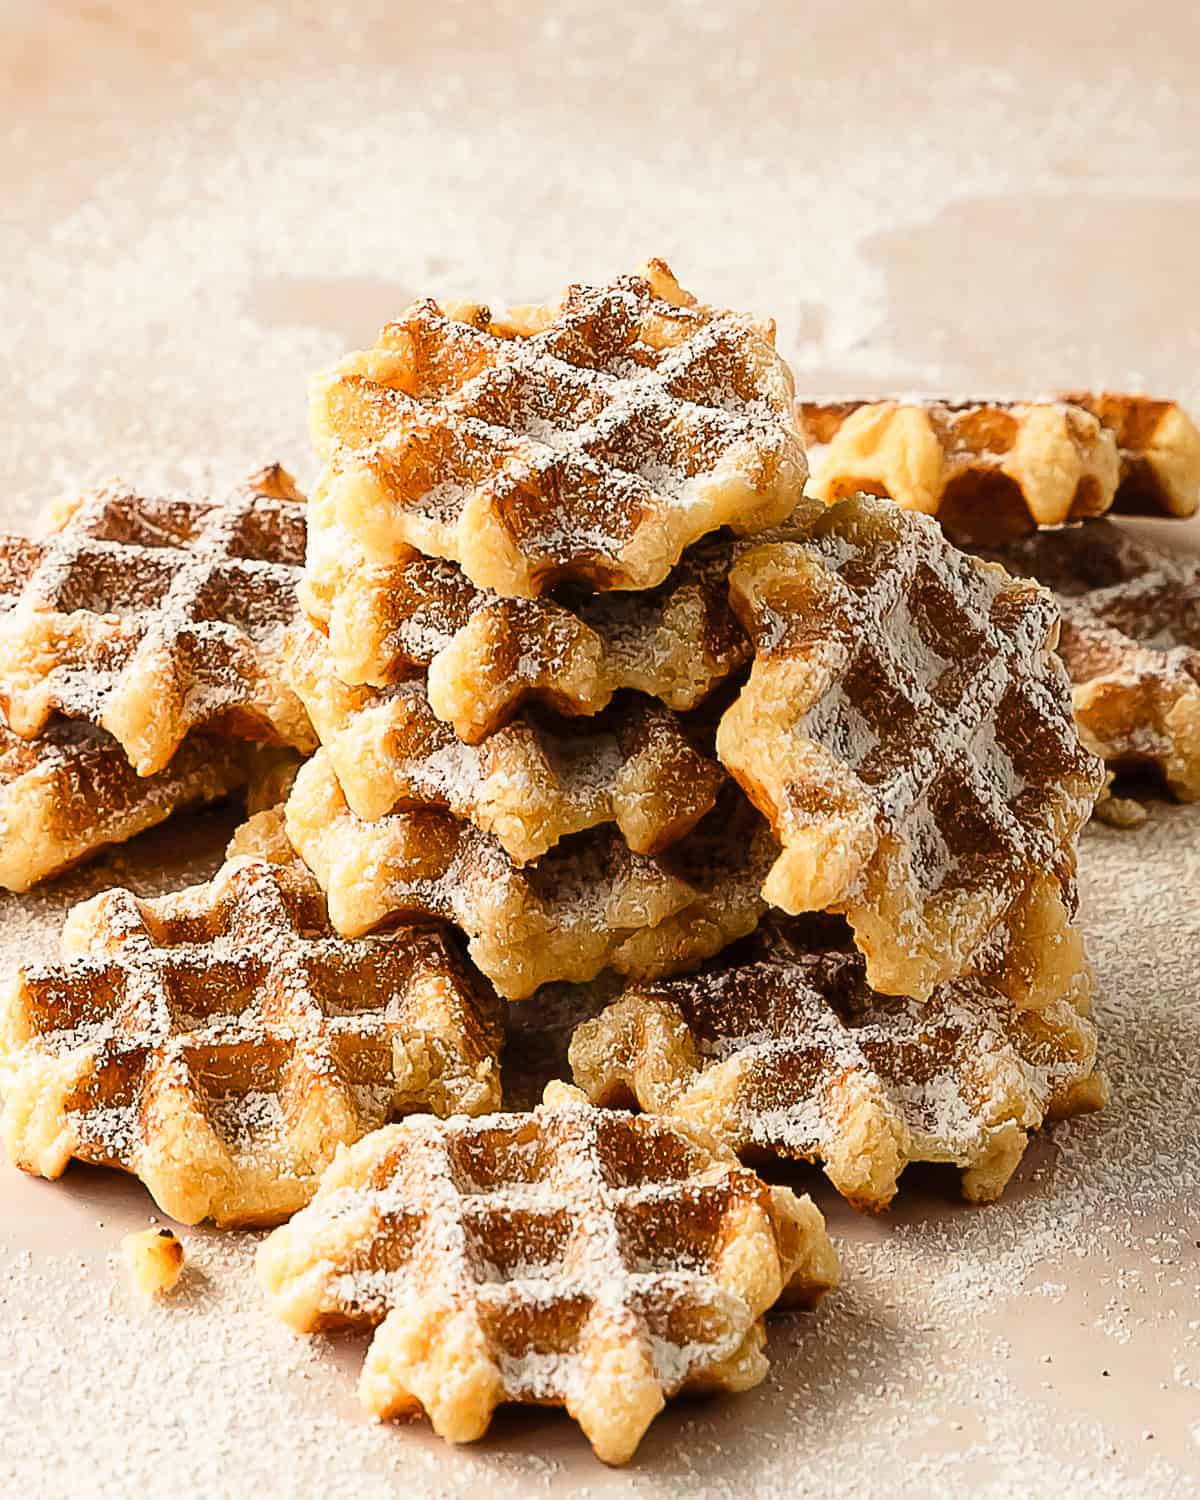 Waffle cookies area classic buttery vanilla sugar cookie cooked on a waffle iron. These easy cookie waffles have a soft buttery interior with a crisp golden brown exterior.